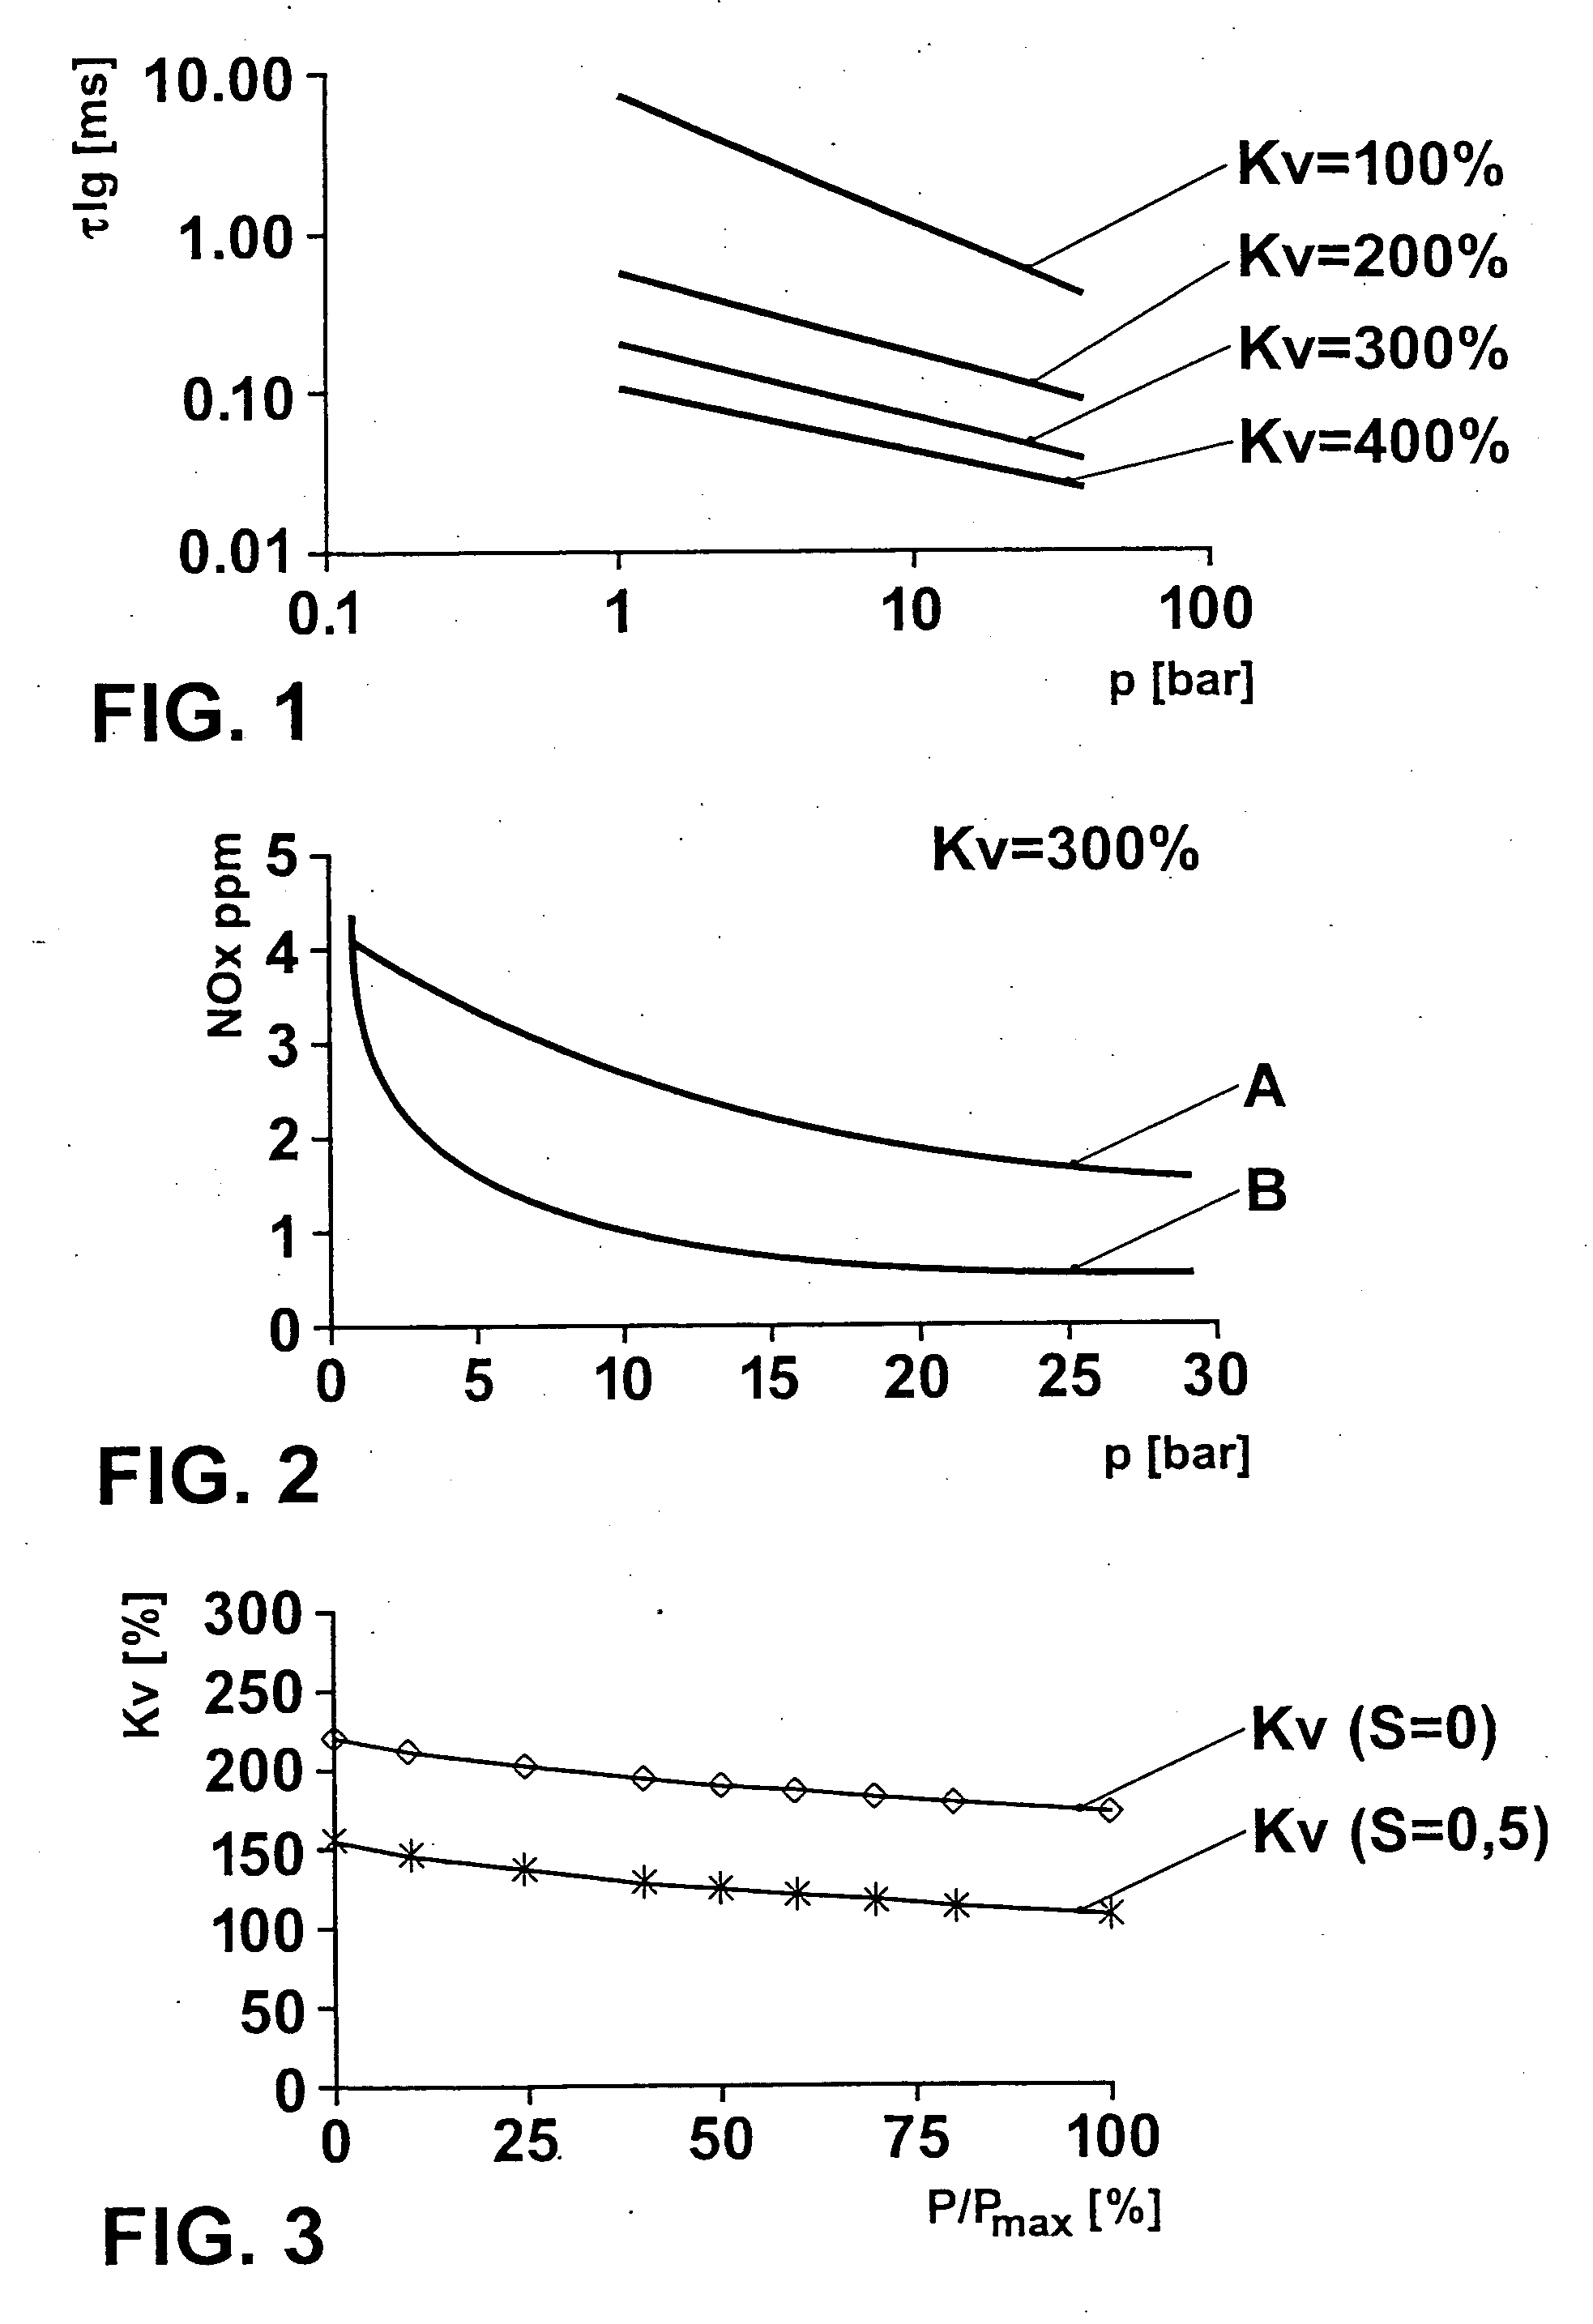 Method for combustion of a fuel